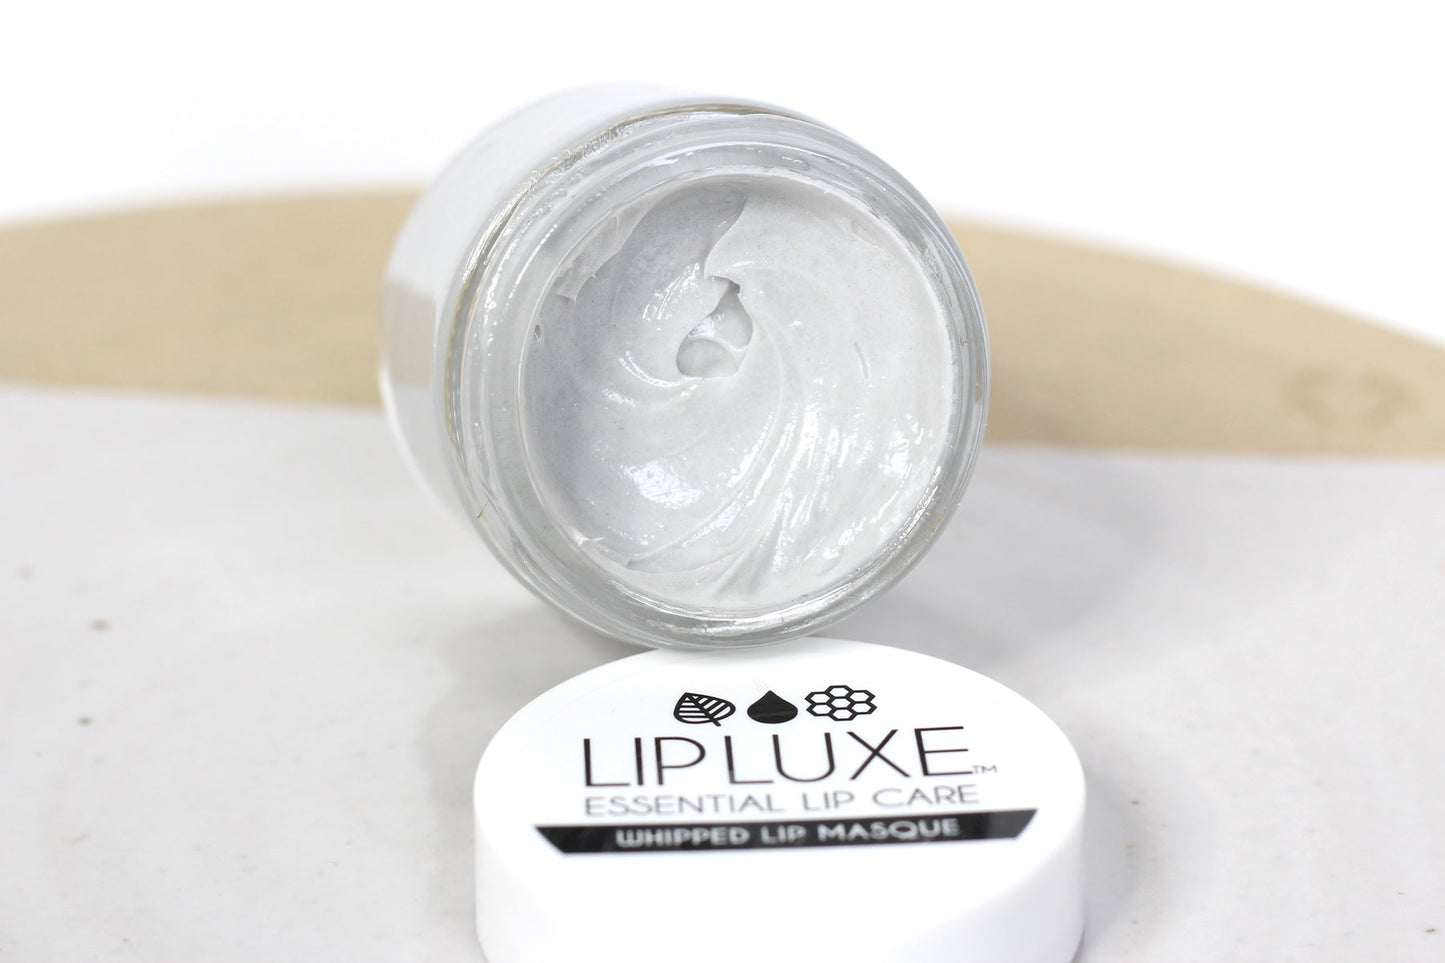 Whipped Lip Masque